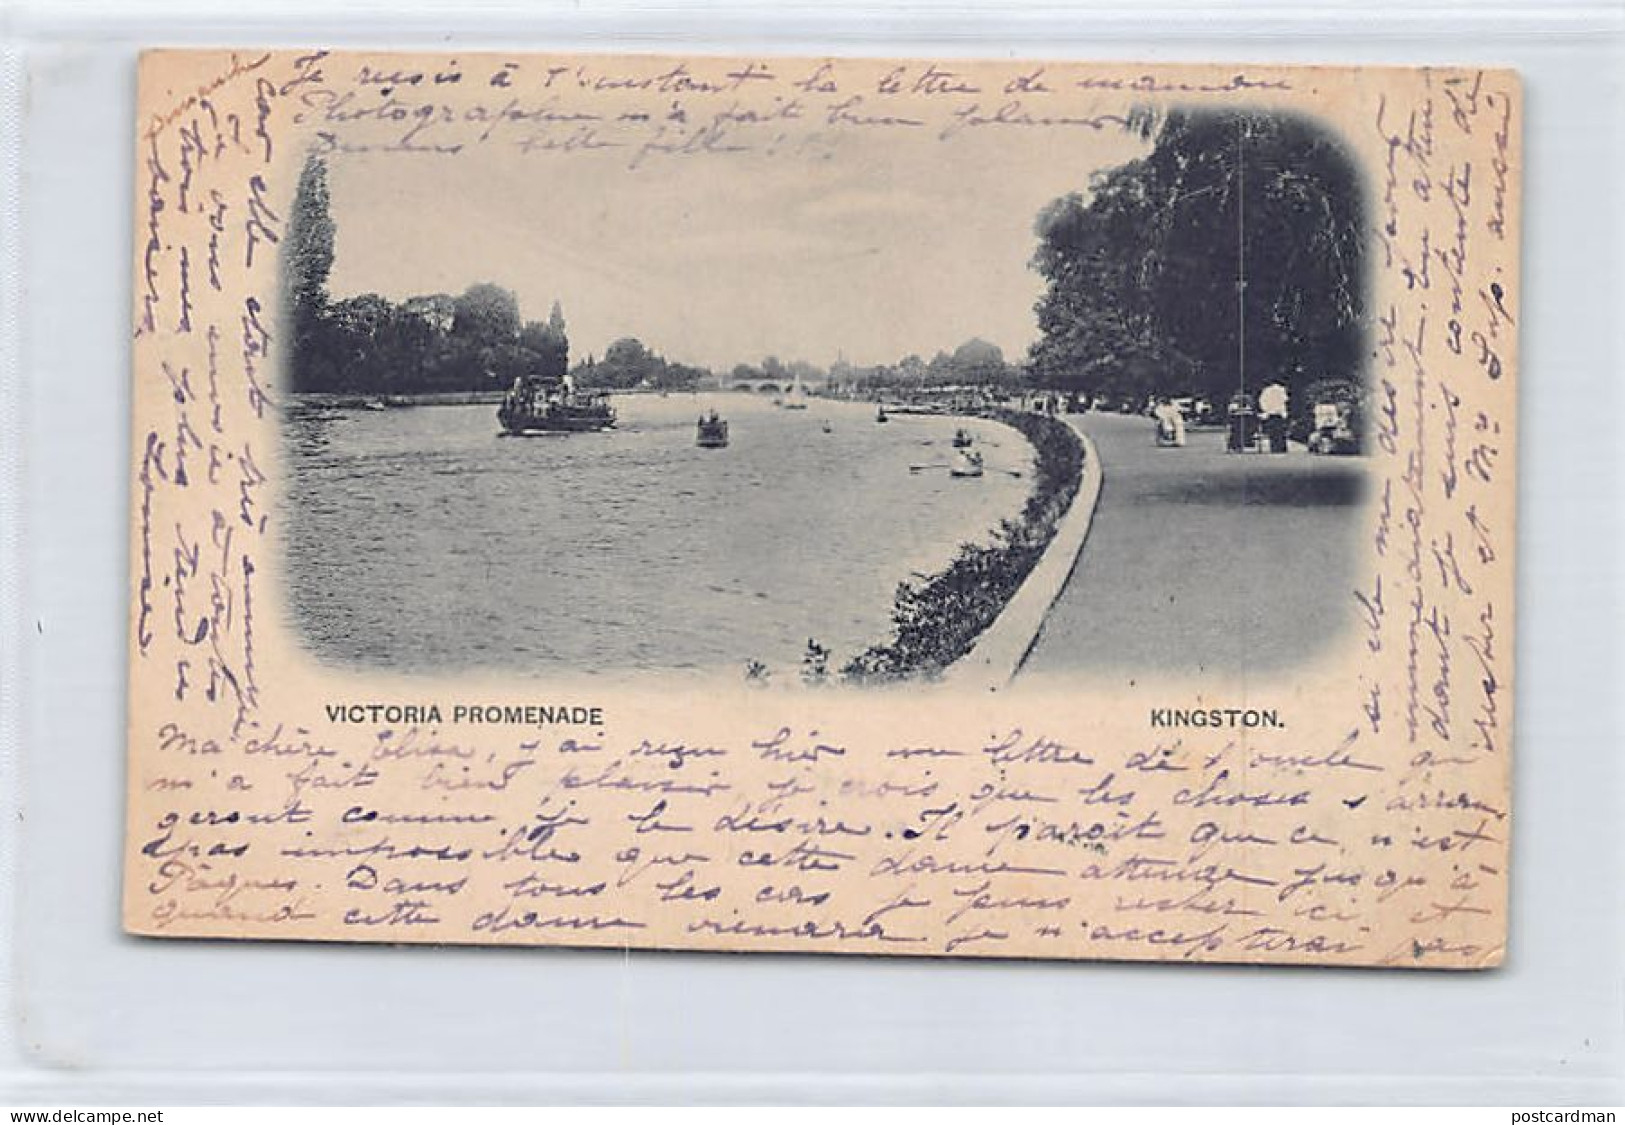 KINGSTON UPON THAMES (Greater London) Victoria Promenade - Year 1899 - Forerunner Small Size Postcard - SEE SCANS FOR CO - London Suburbs